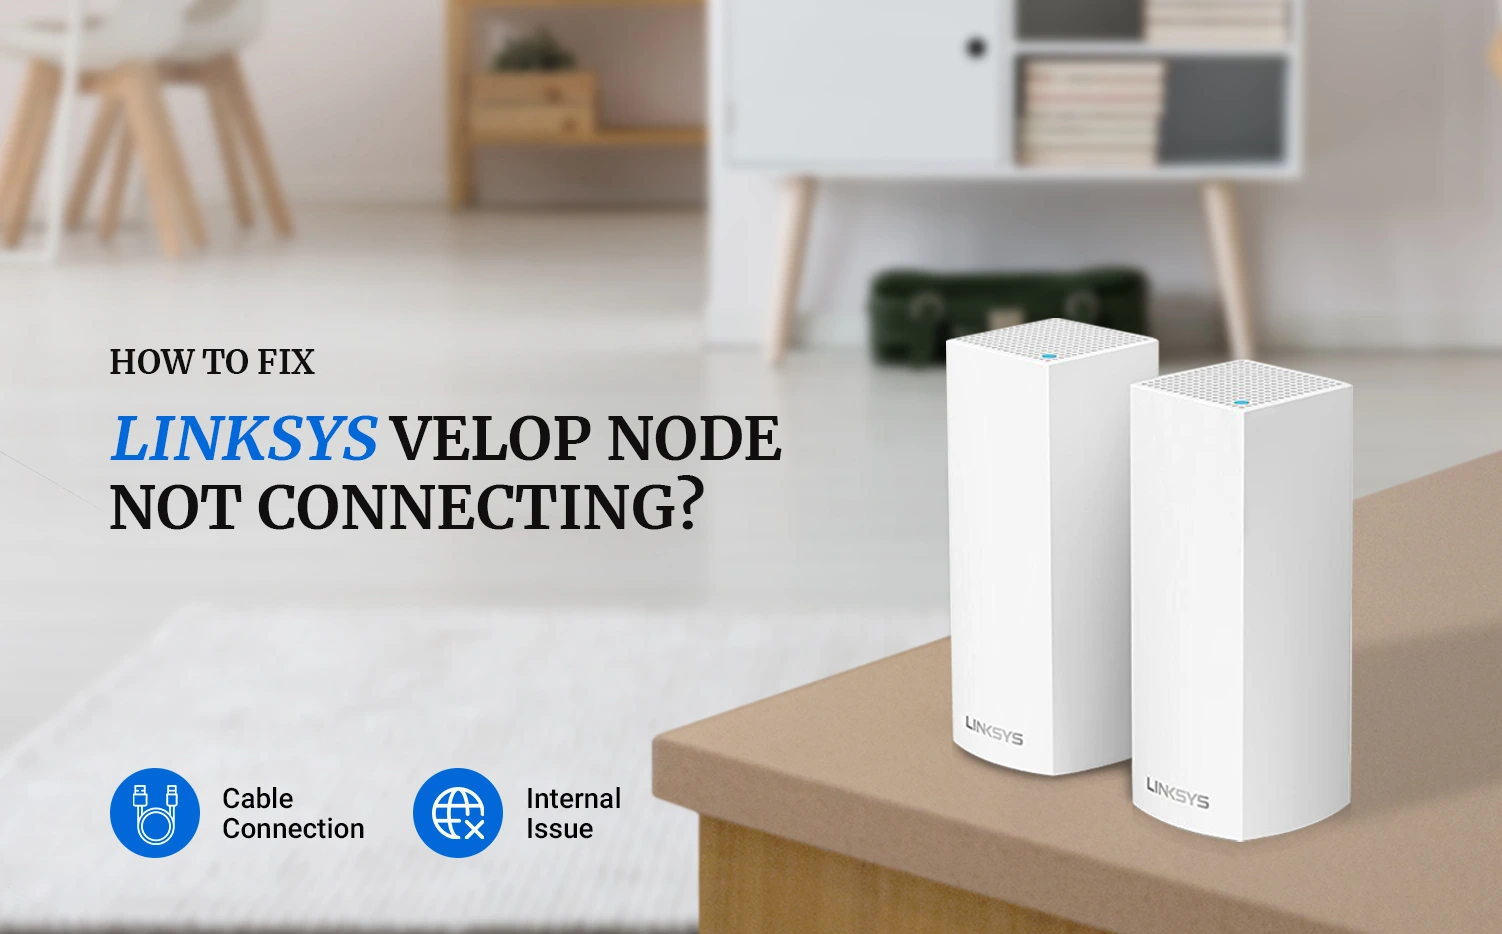 LINKSYS VELOP NODE NOT CONNECTING